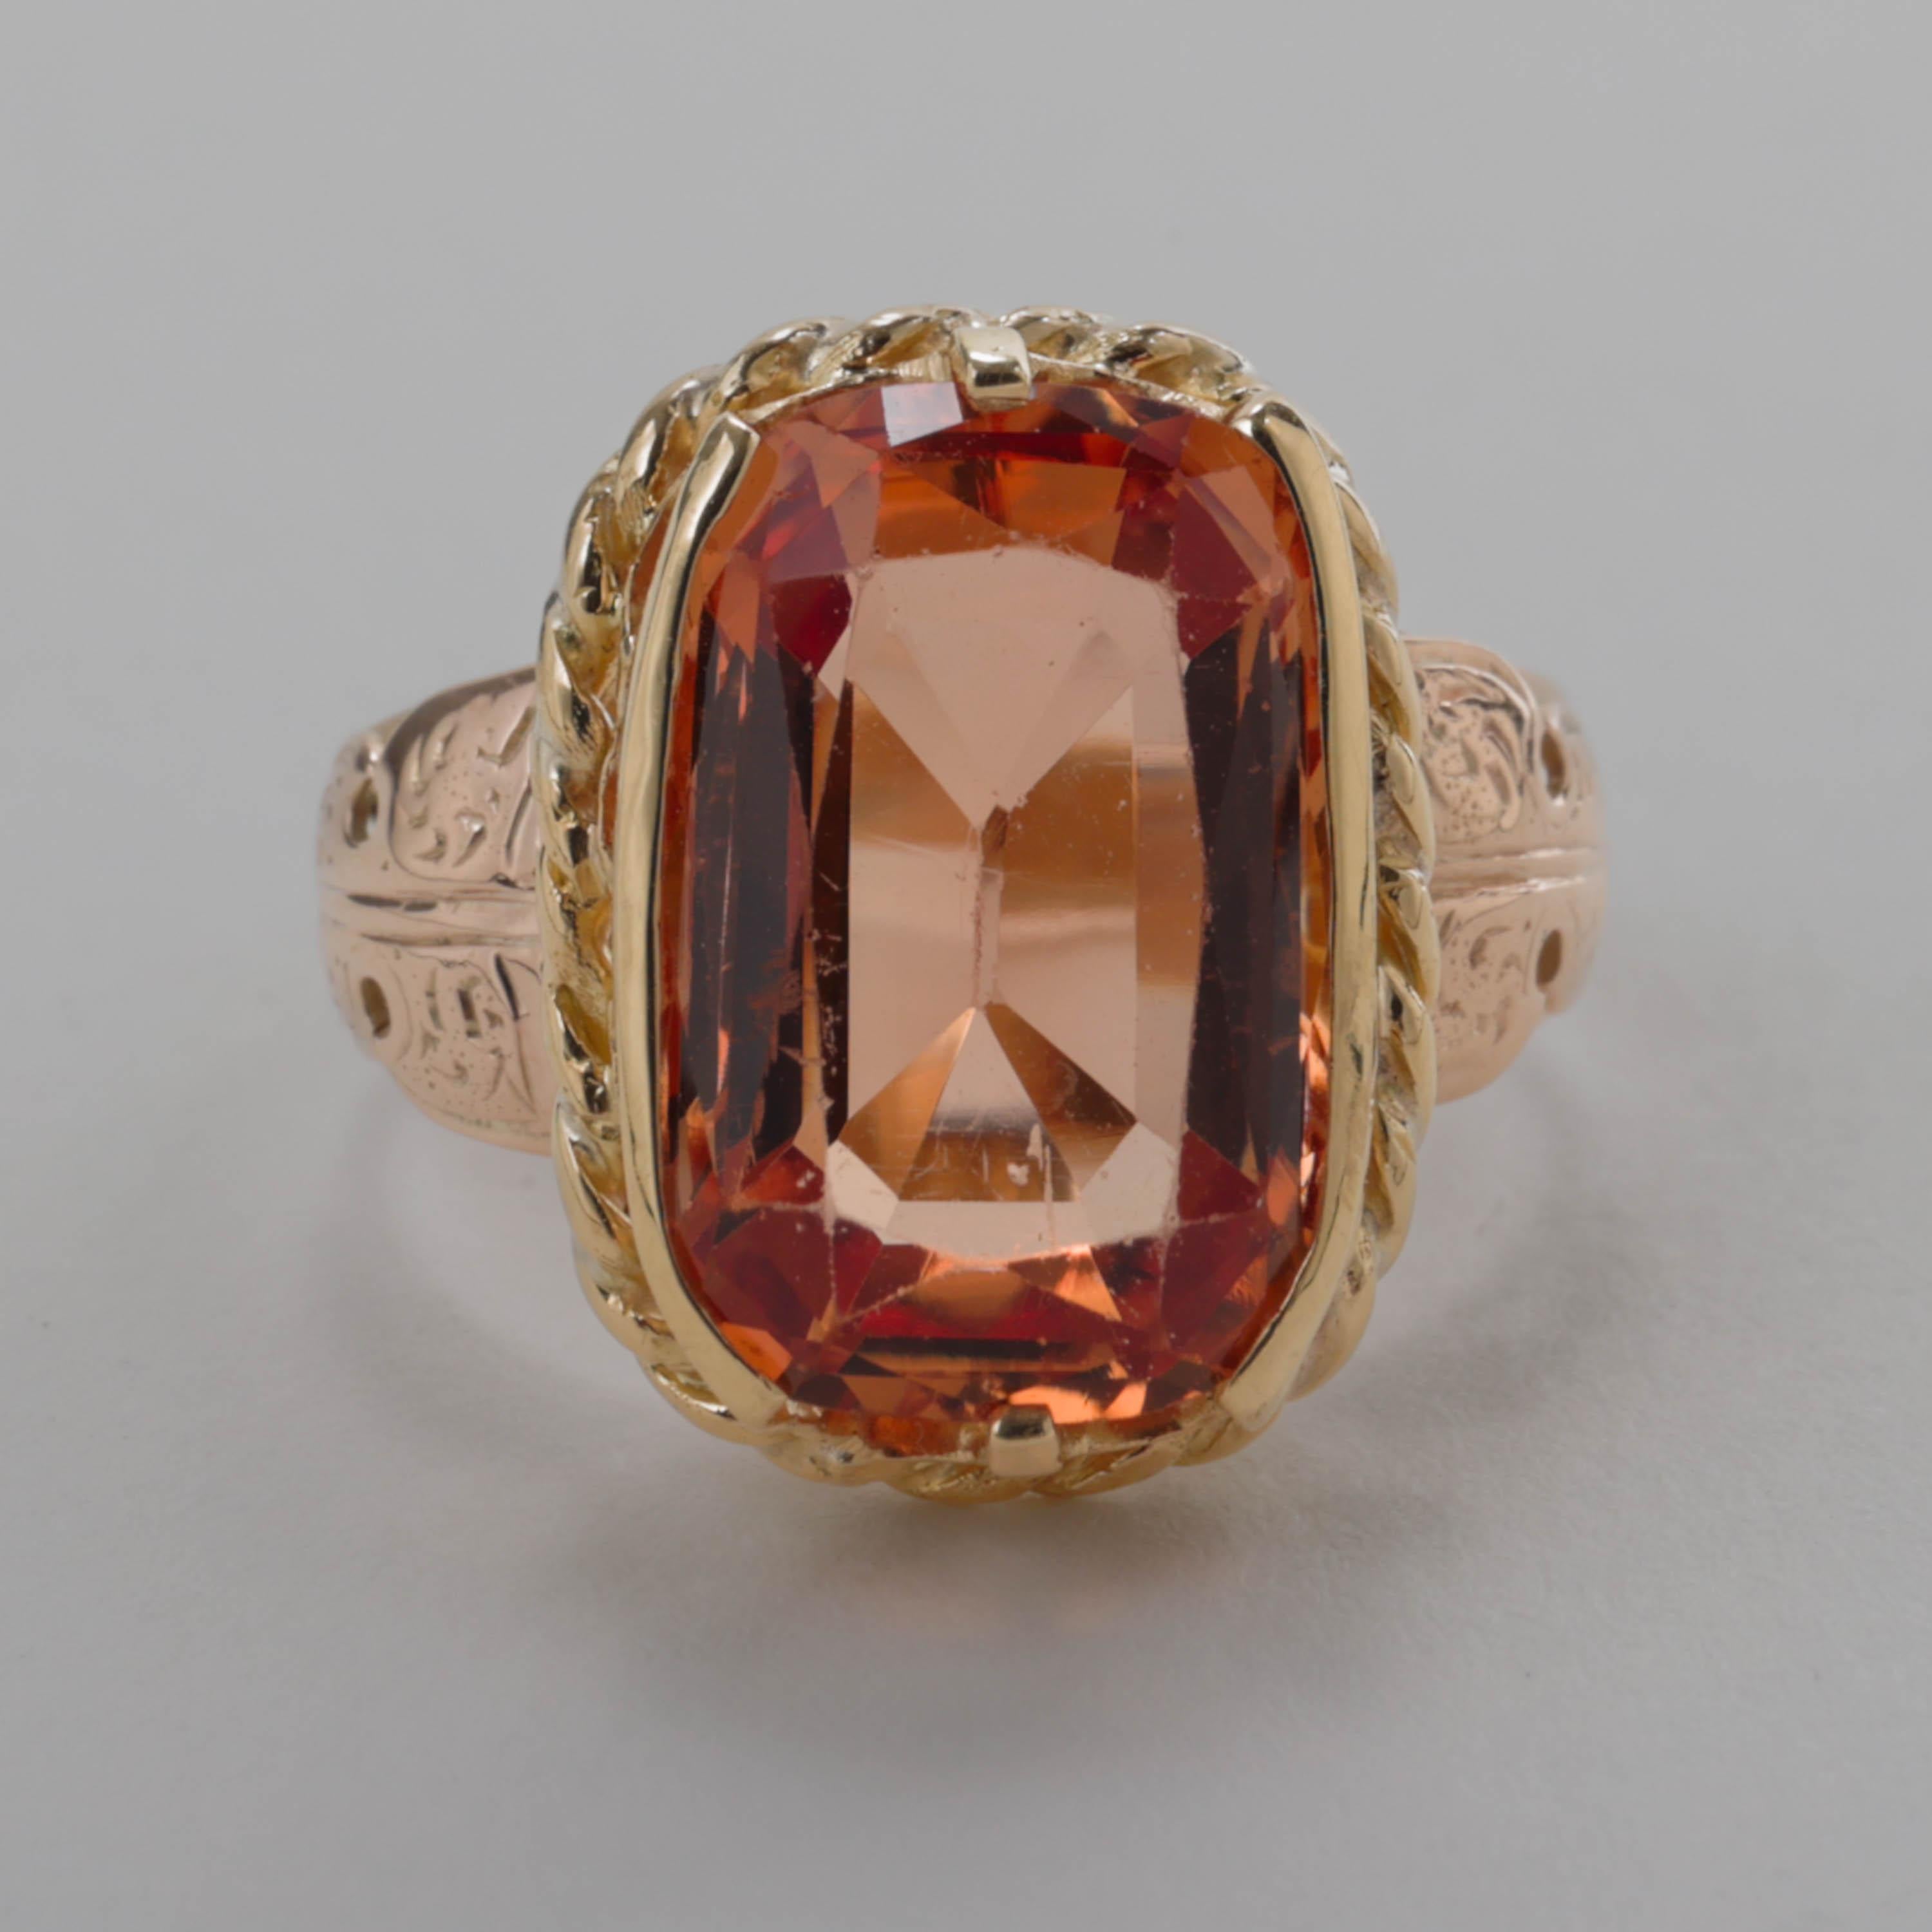 This is a genuinely impressive and rather spectacular ring. It features a large, cushion-cut reddish-orange imperial topaz that has been certified natural, untreated and with a Brazilian origin. The interesting thing about topaz is that it's